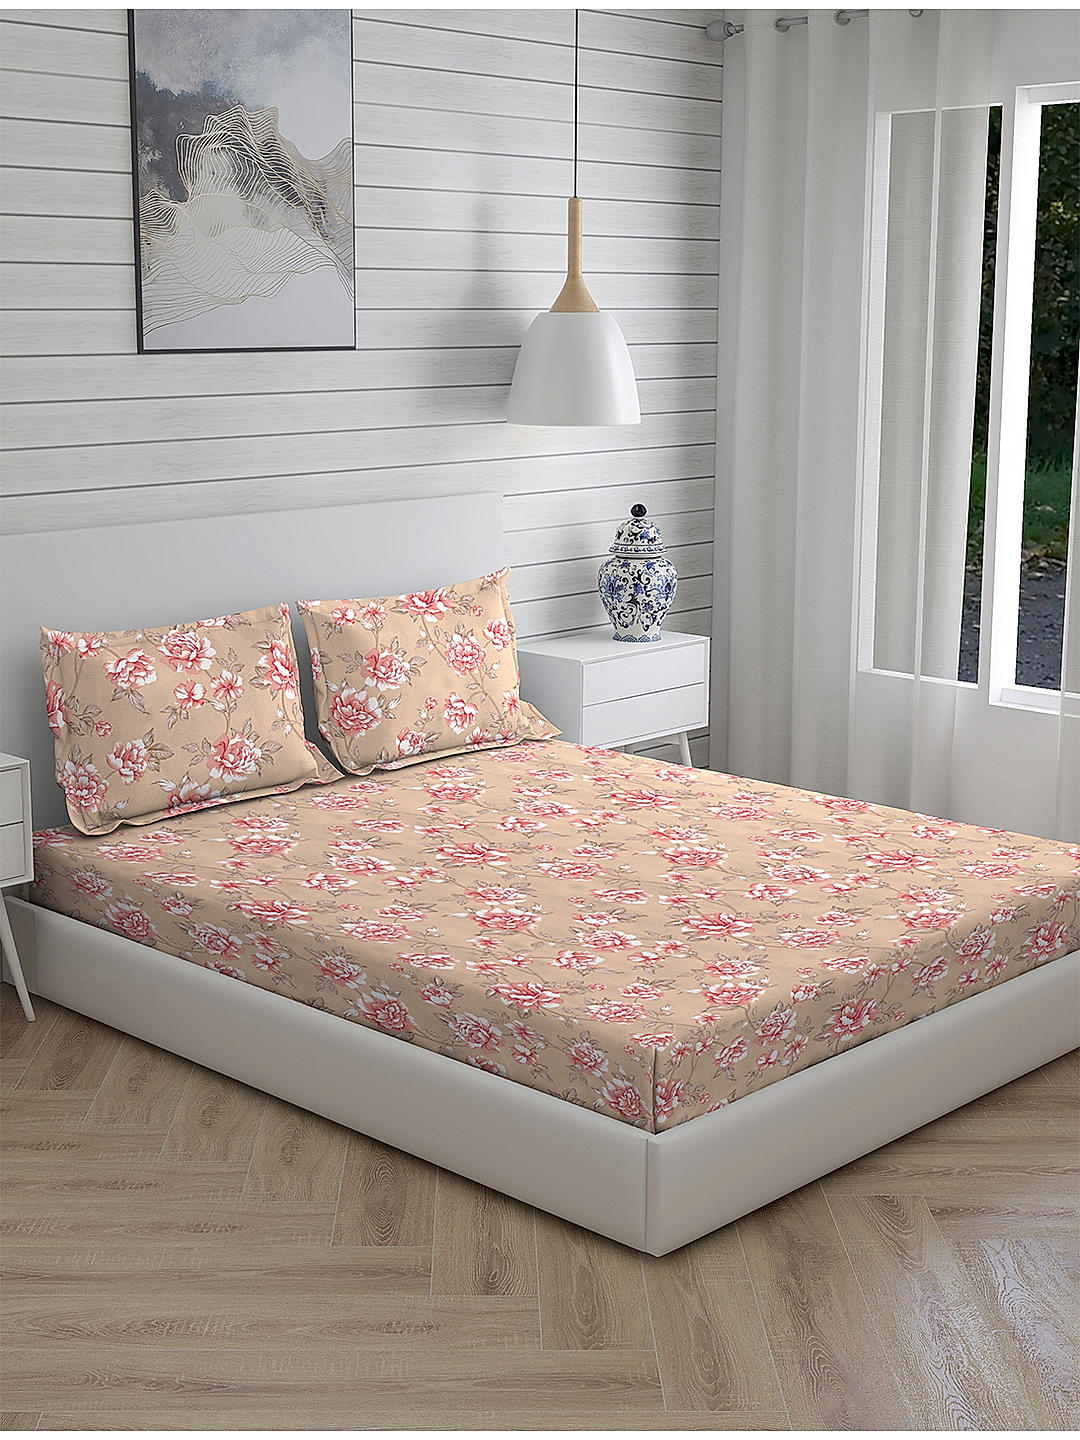 Signature Sateen 300 TC 100% cotton Ultra Fine Multi Colored Floral Print Fitted Bed Sheet Set